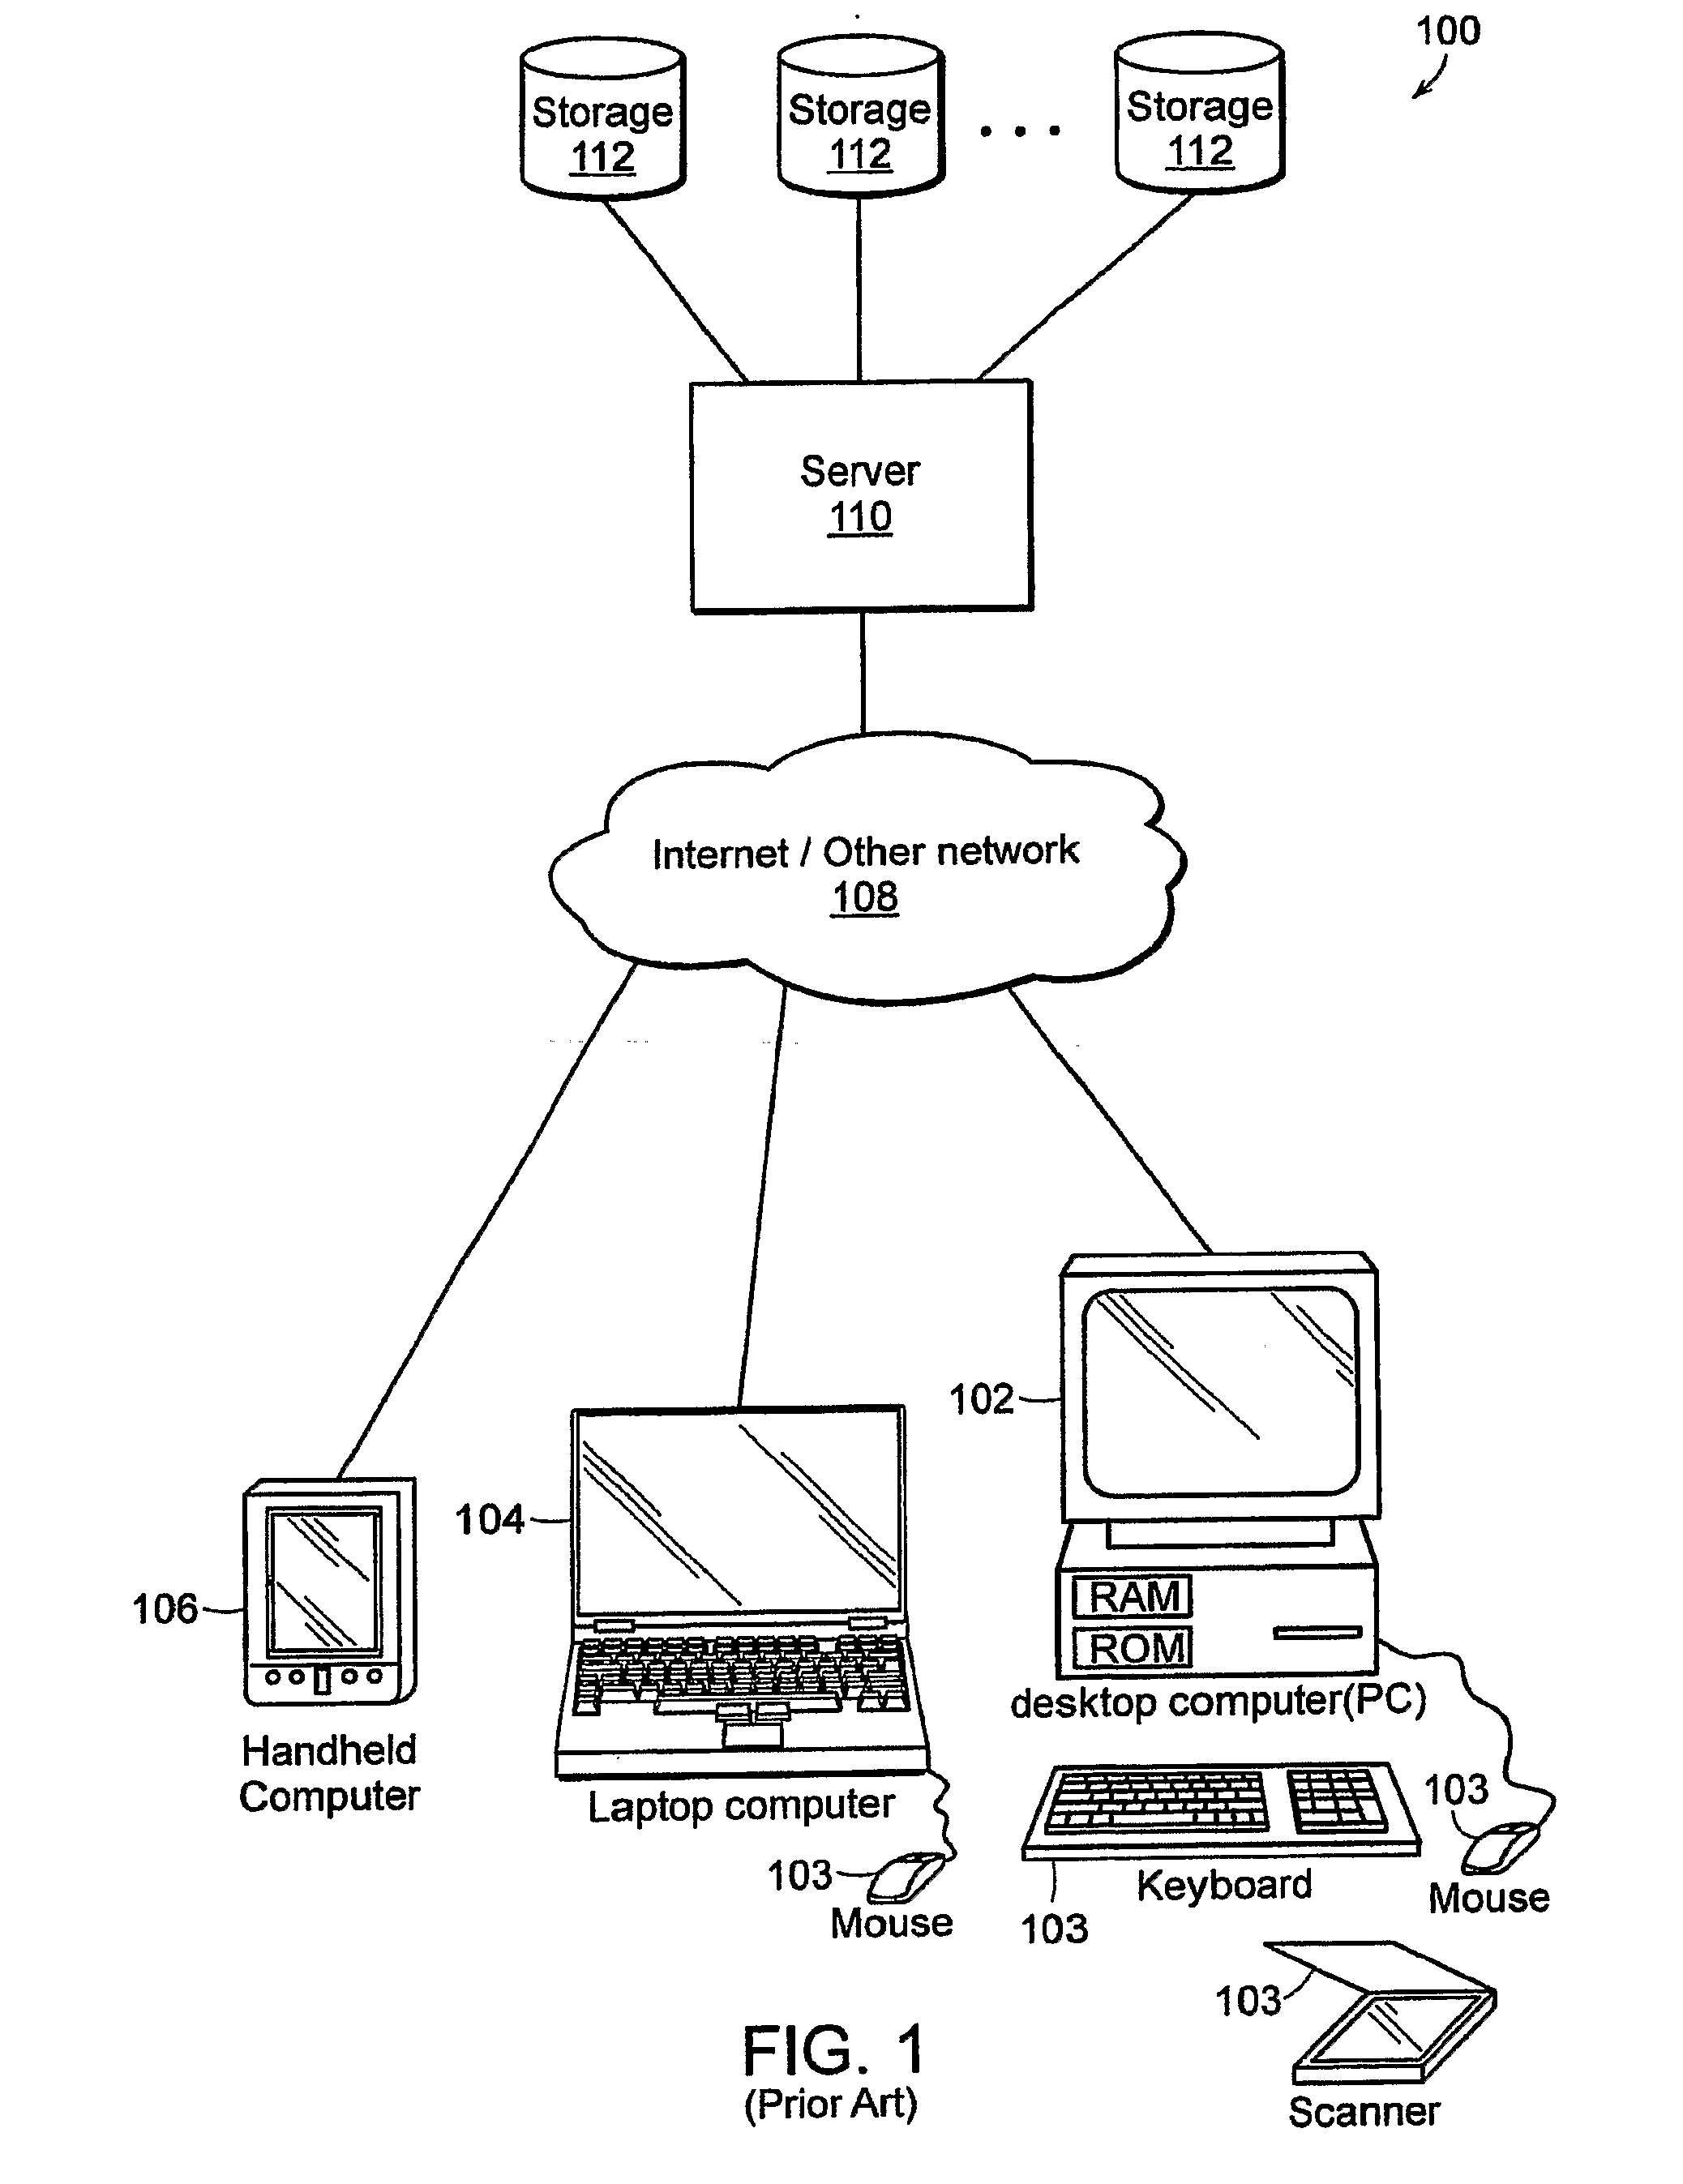 Systems and methods for monitoring software application quality